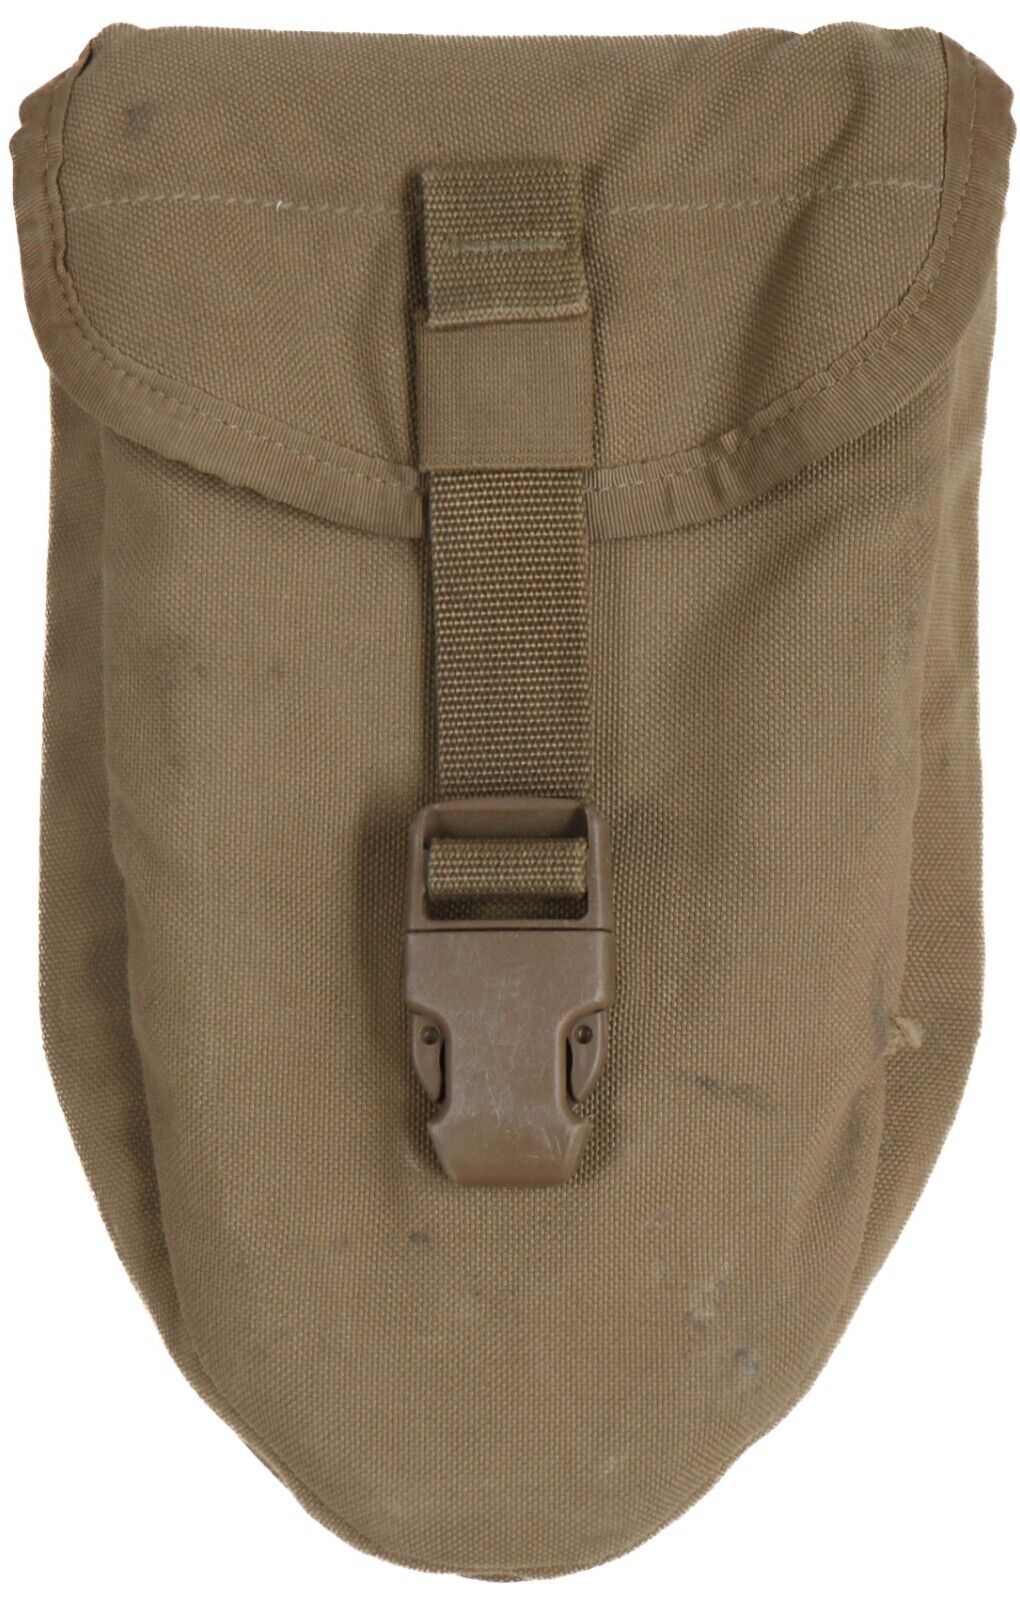 DAMAGED USMC Entrenching E Tool Pouch Coyote Marine Corps Gerber Trifold Shovel